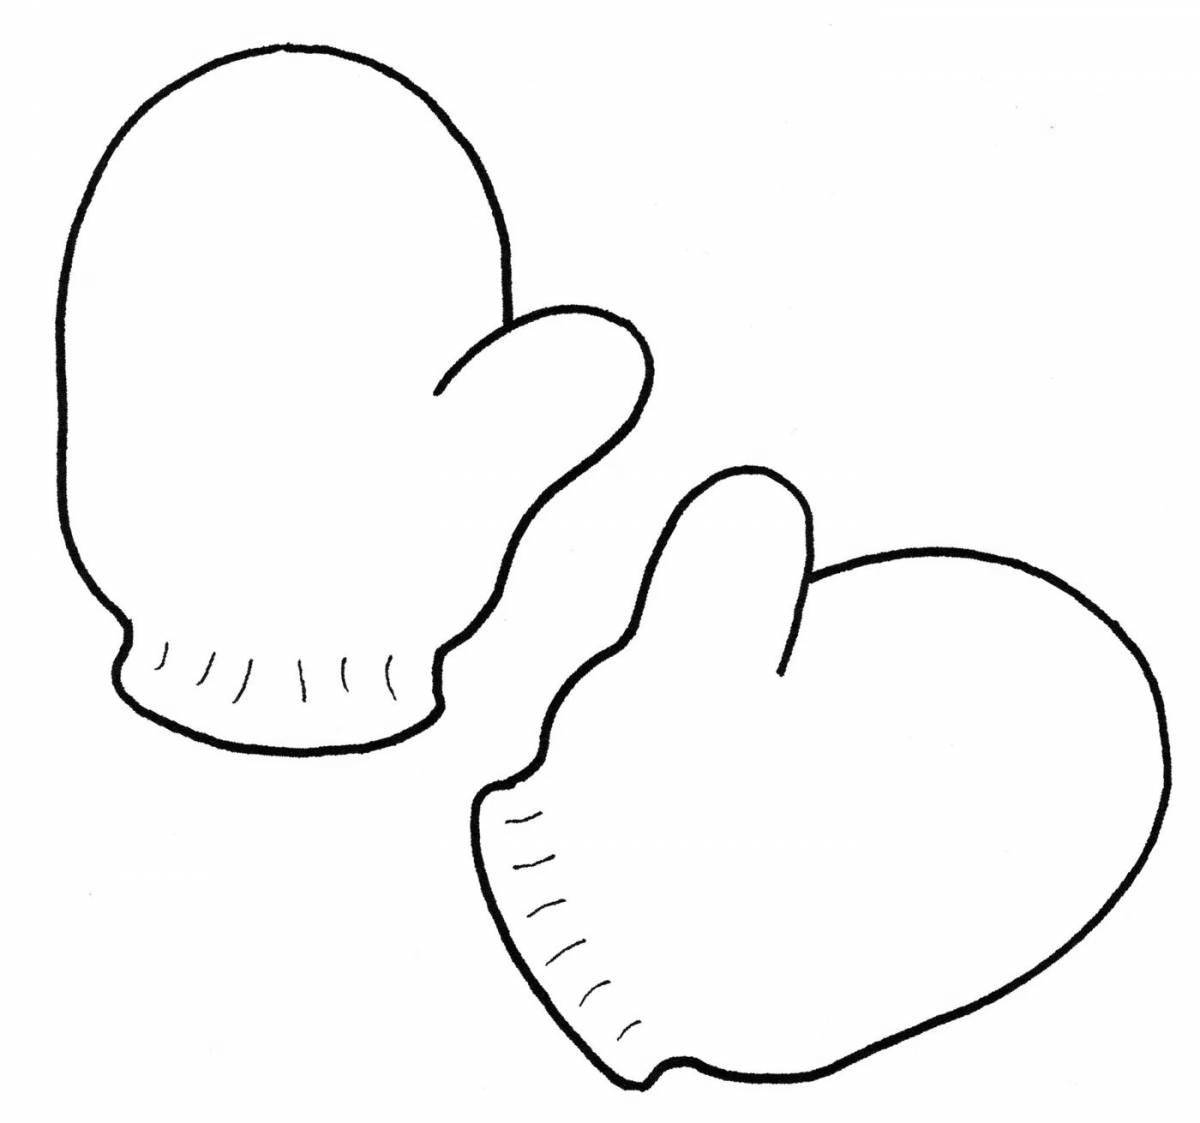 Creative patterns of mittens coloring book for children